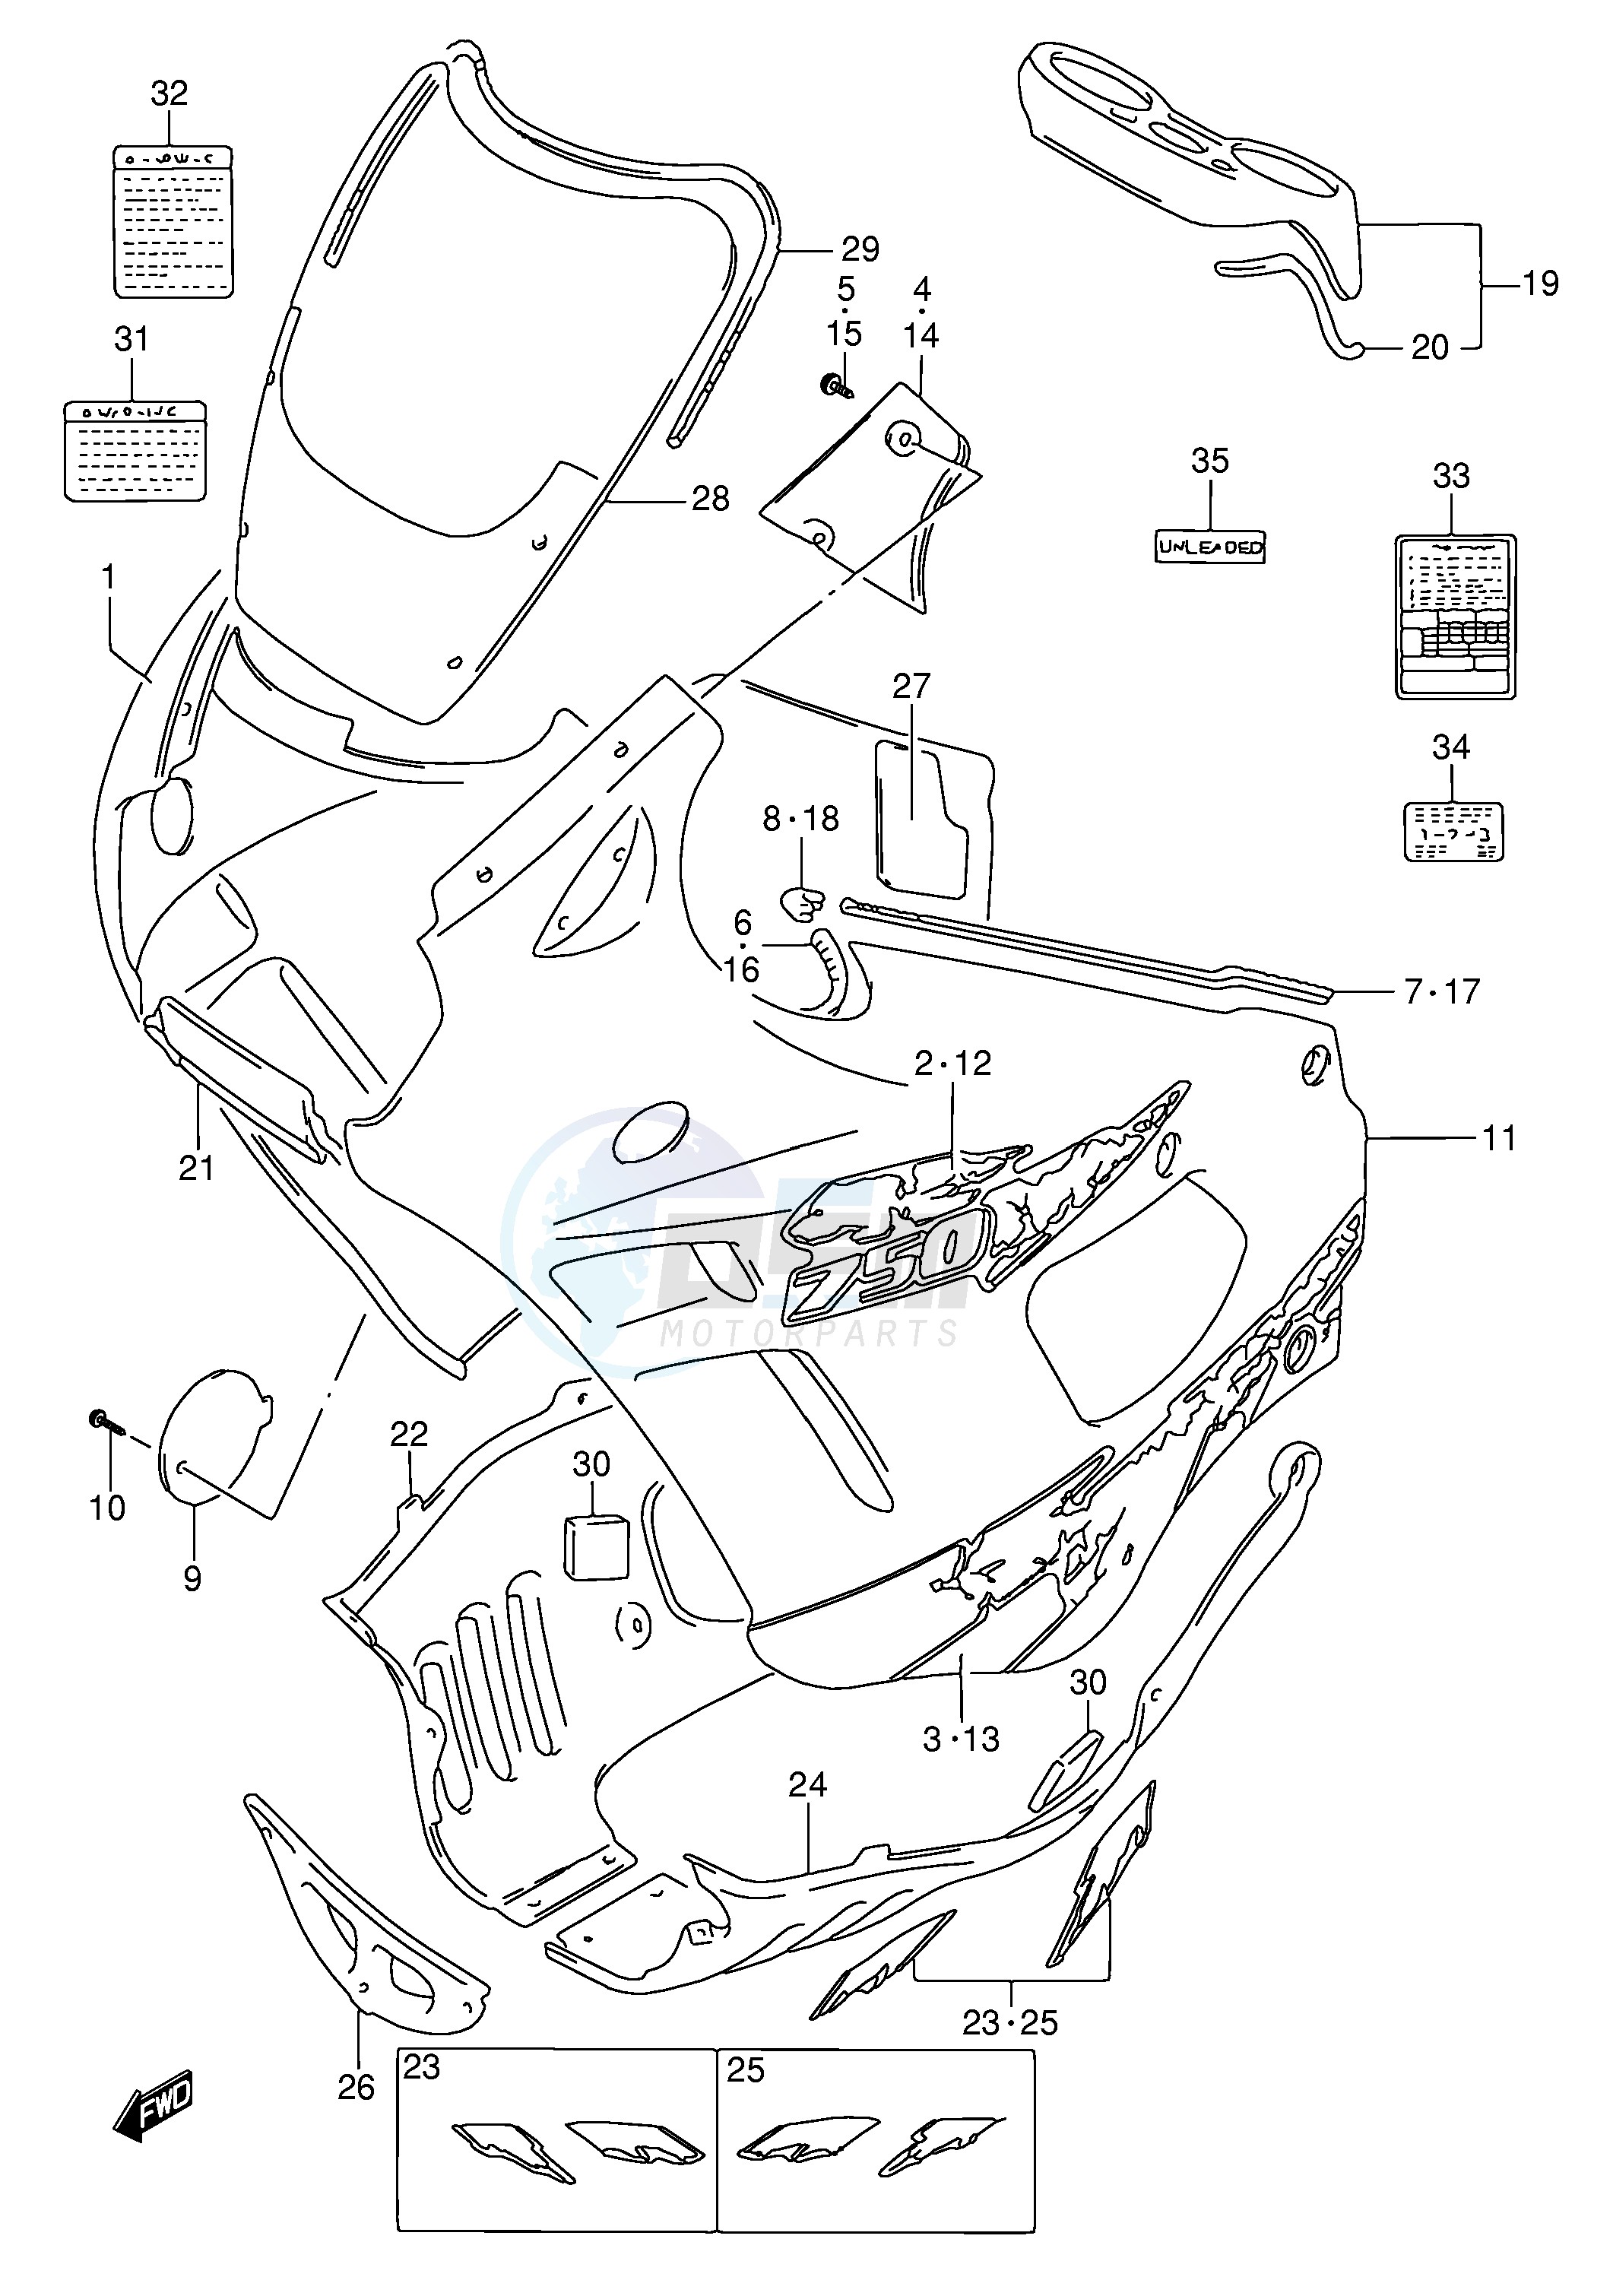 COWLING BODY (MODEL S) image